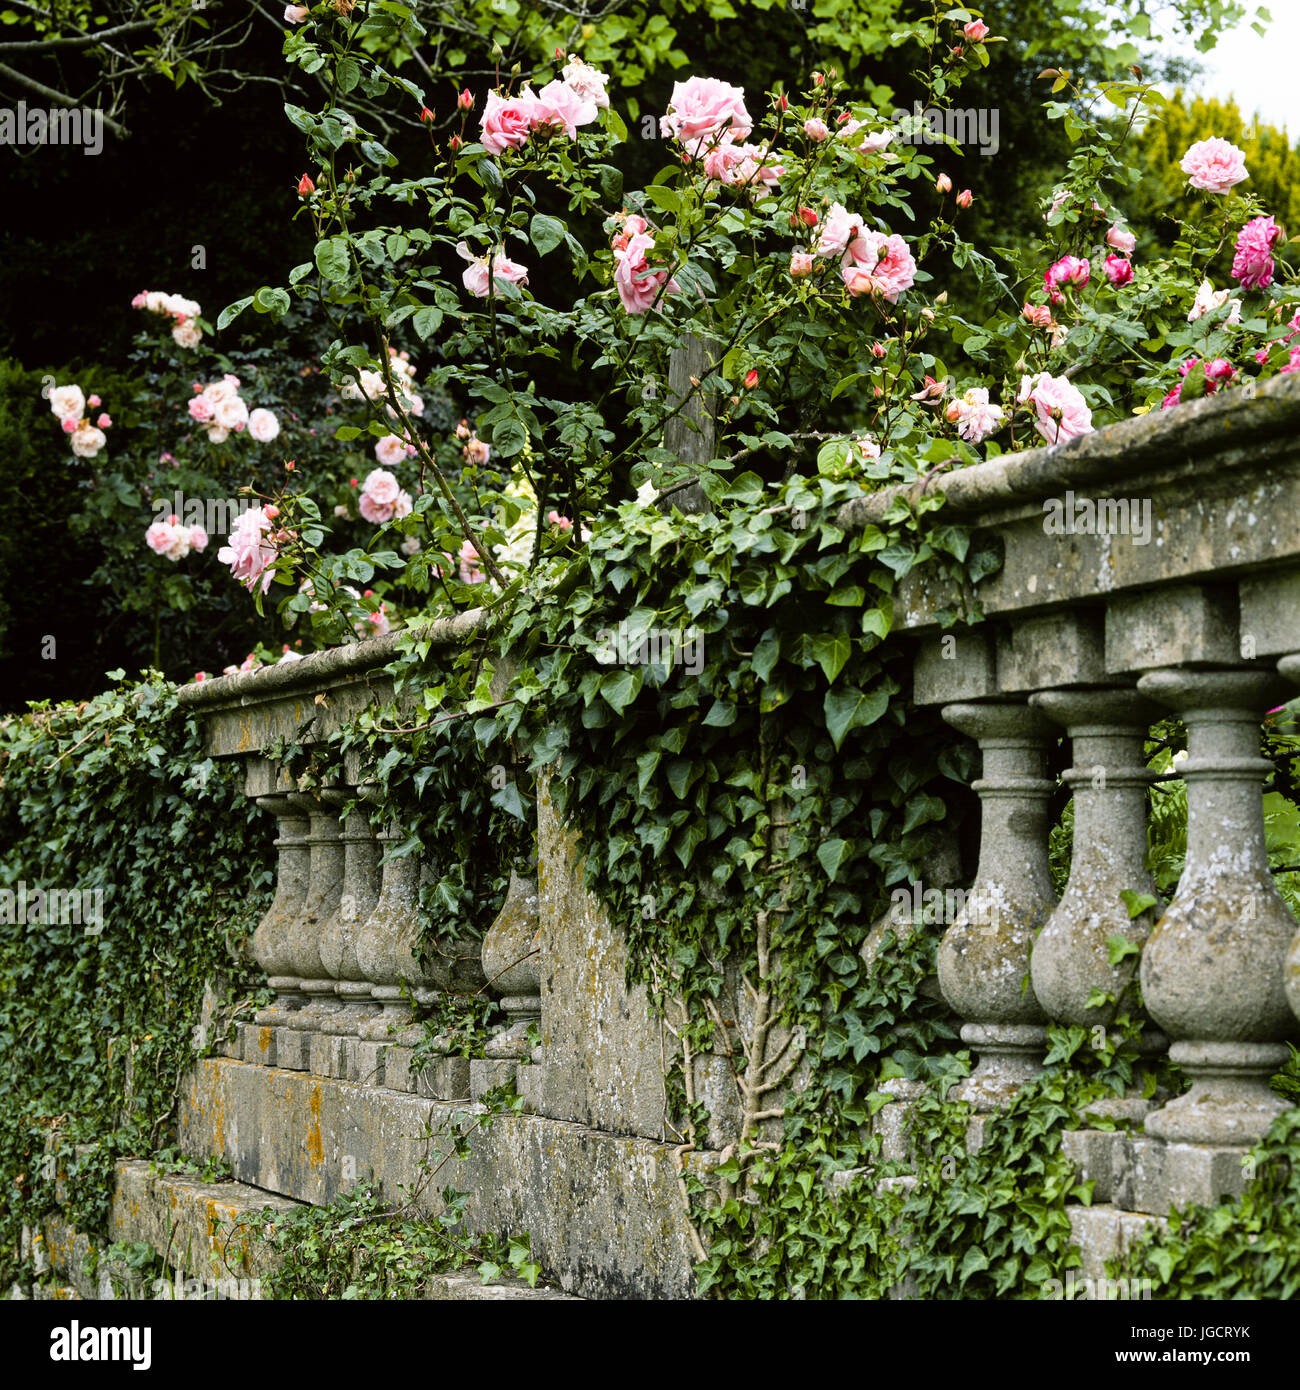 Stone balustrade with pink flowers Stock Photo